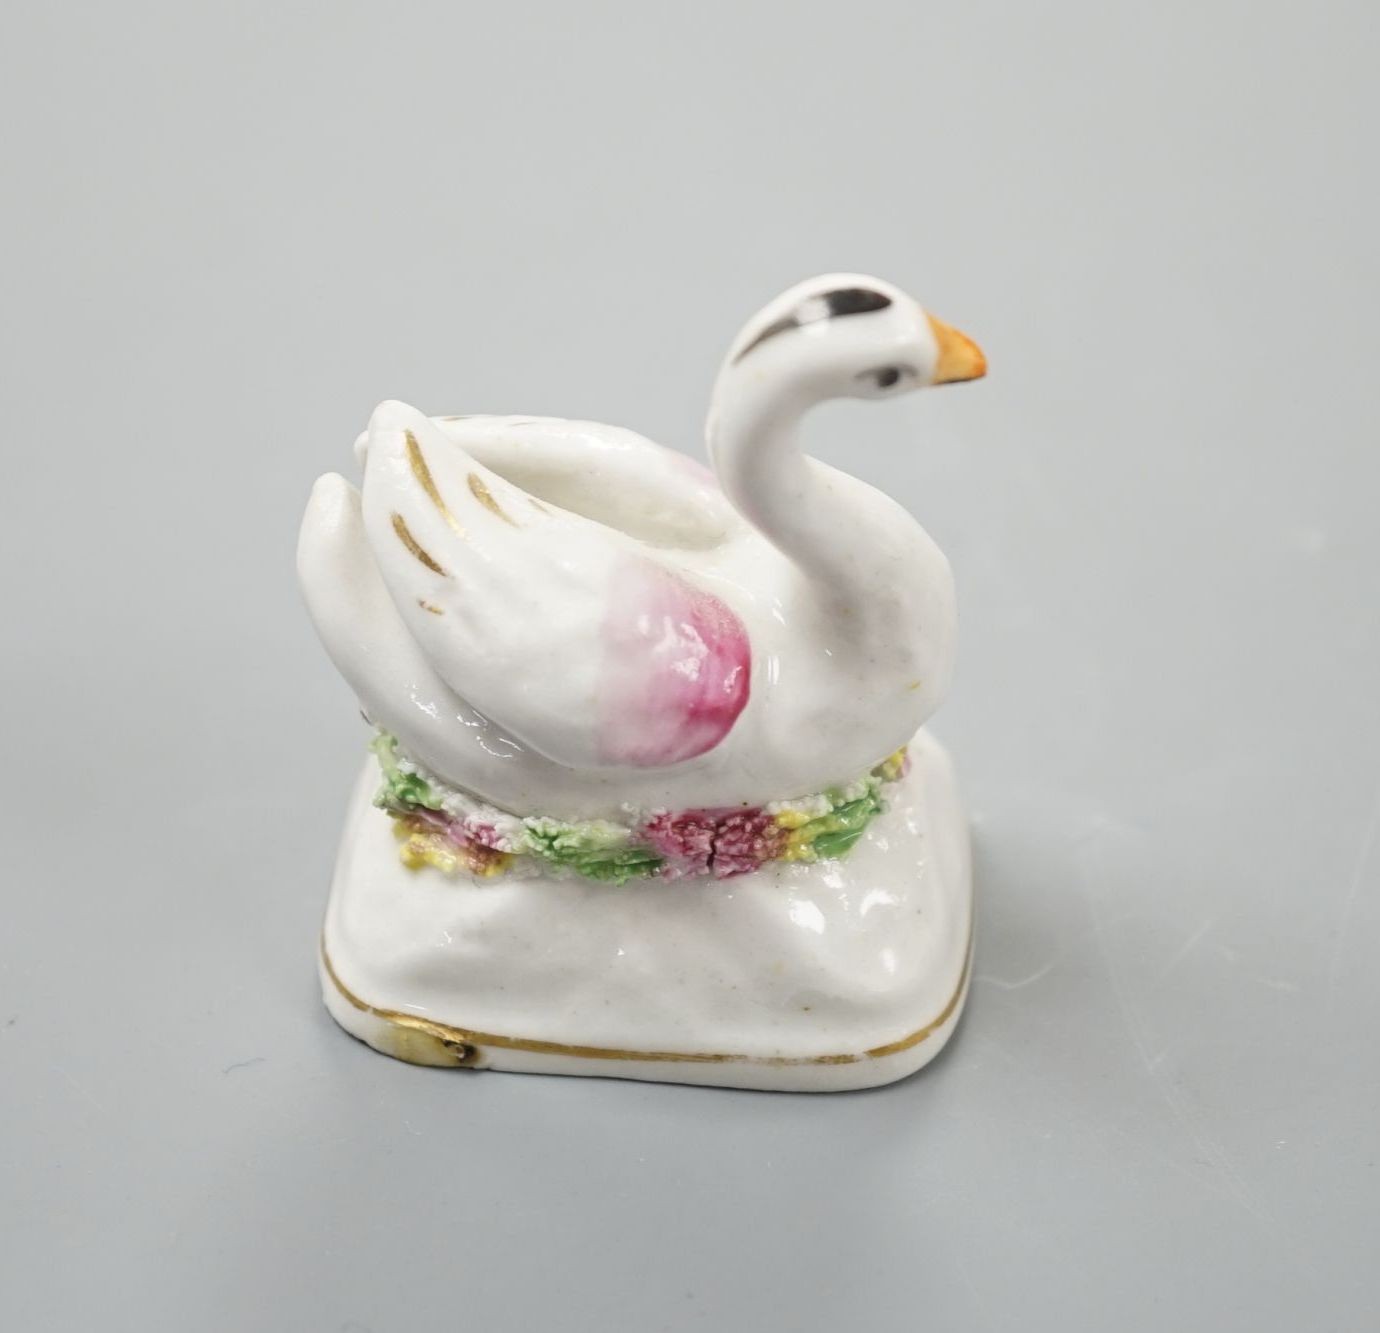 A Staffordshire porcelain model of a swan, c.1835-50, on a mound base, 5.4 cm high, Provenance: Dennis G.Rice collection